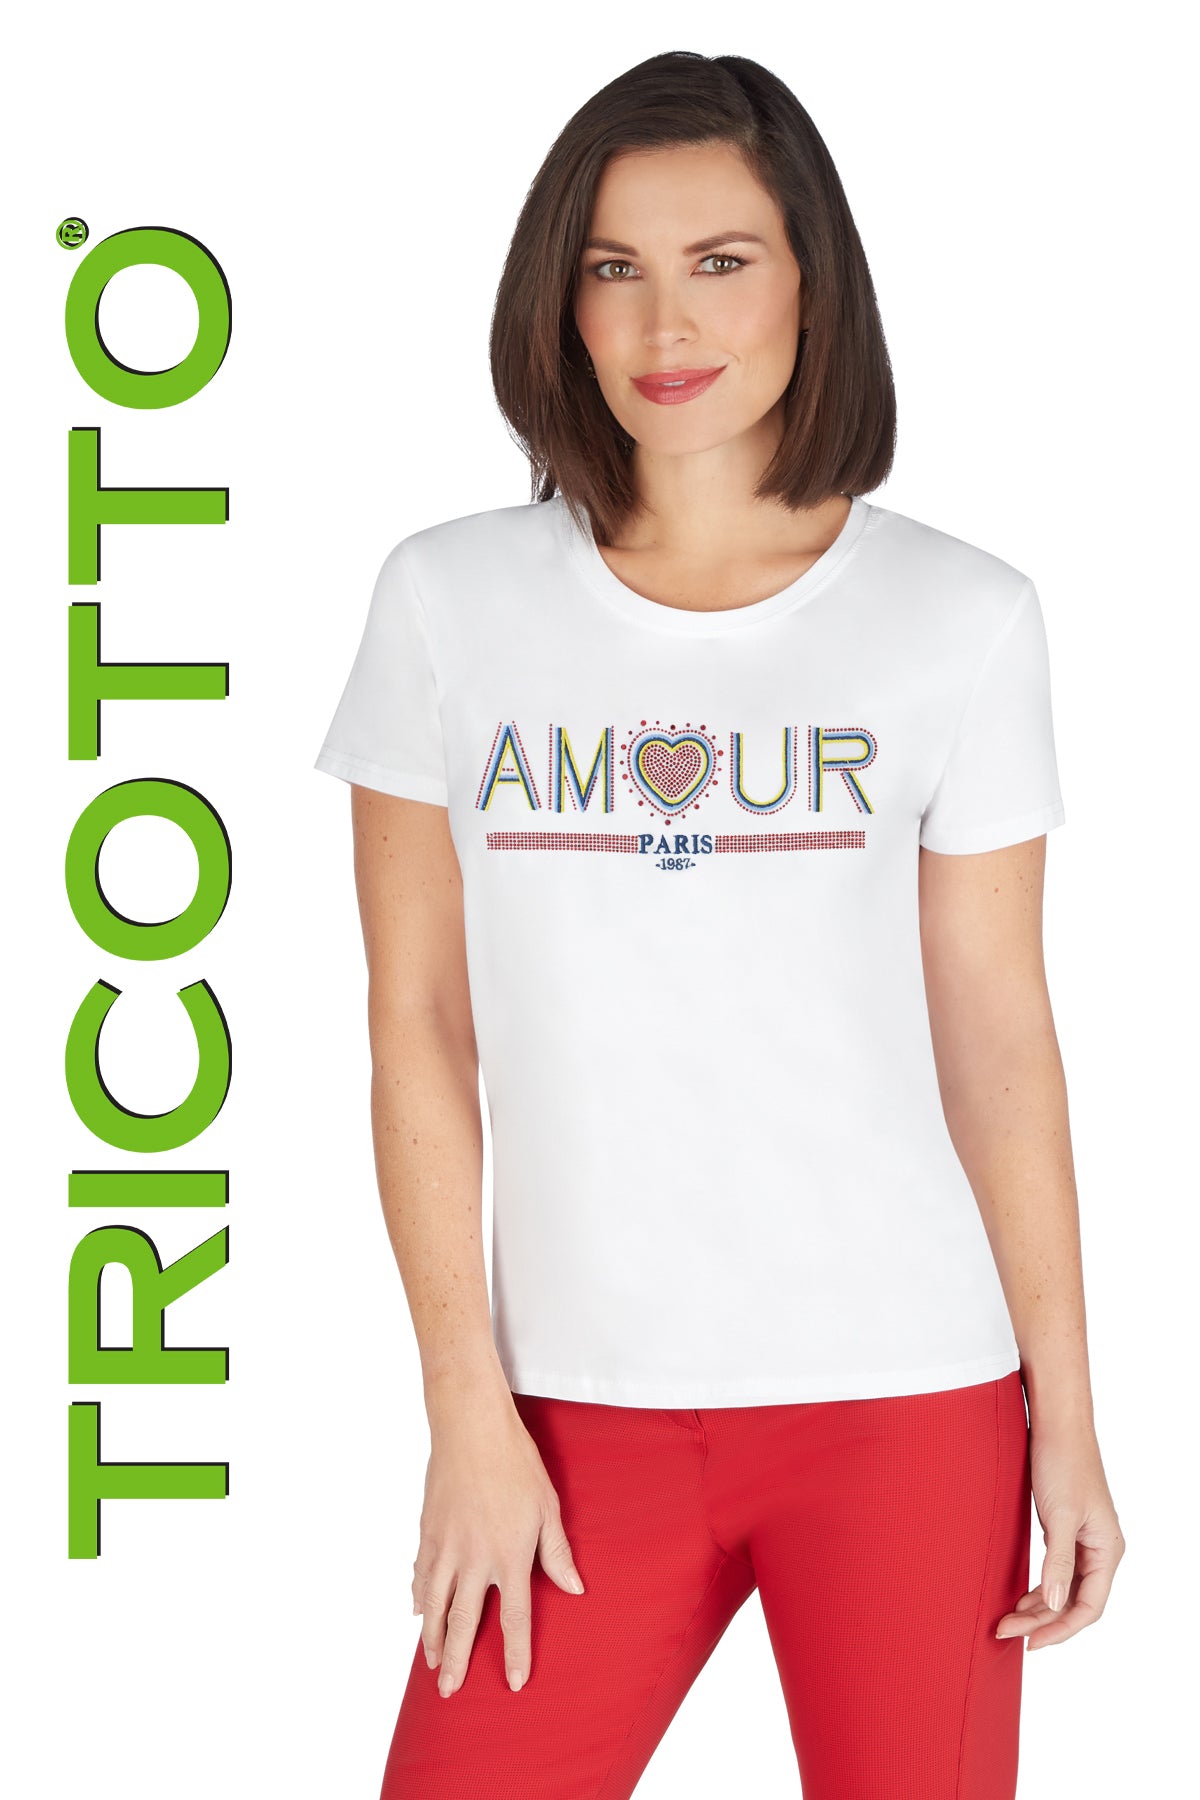 Tricotto T-shirts-Buy Tricotto T-shirts Online-Tricotto Clothing Montreal-Tricotto Clothing Quebec-Tricotto Online T-shirt Shop